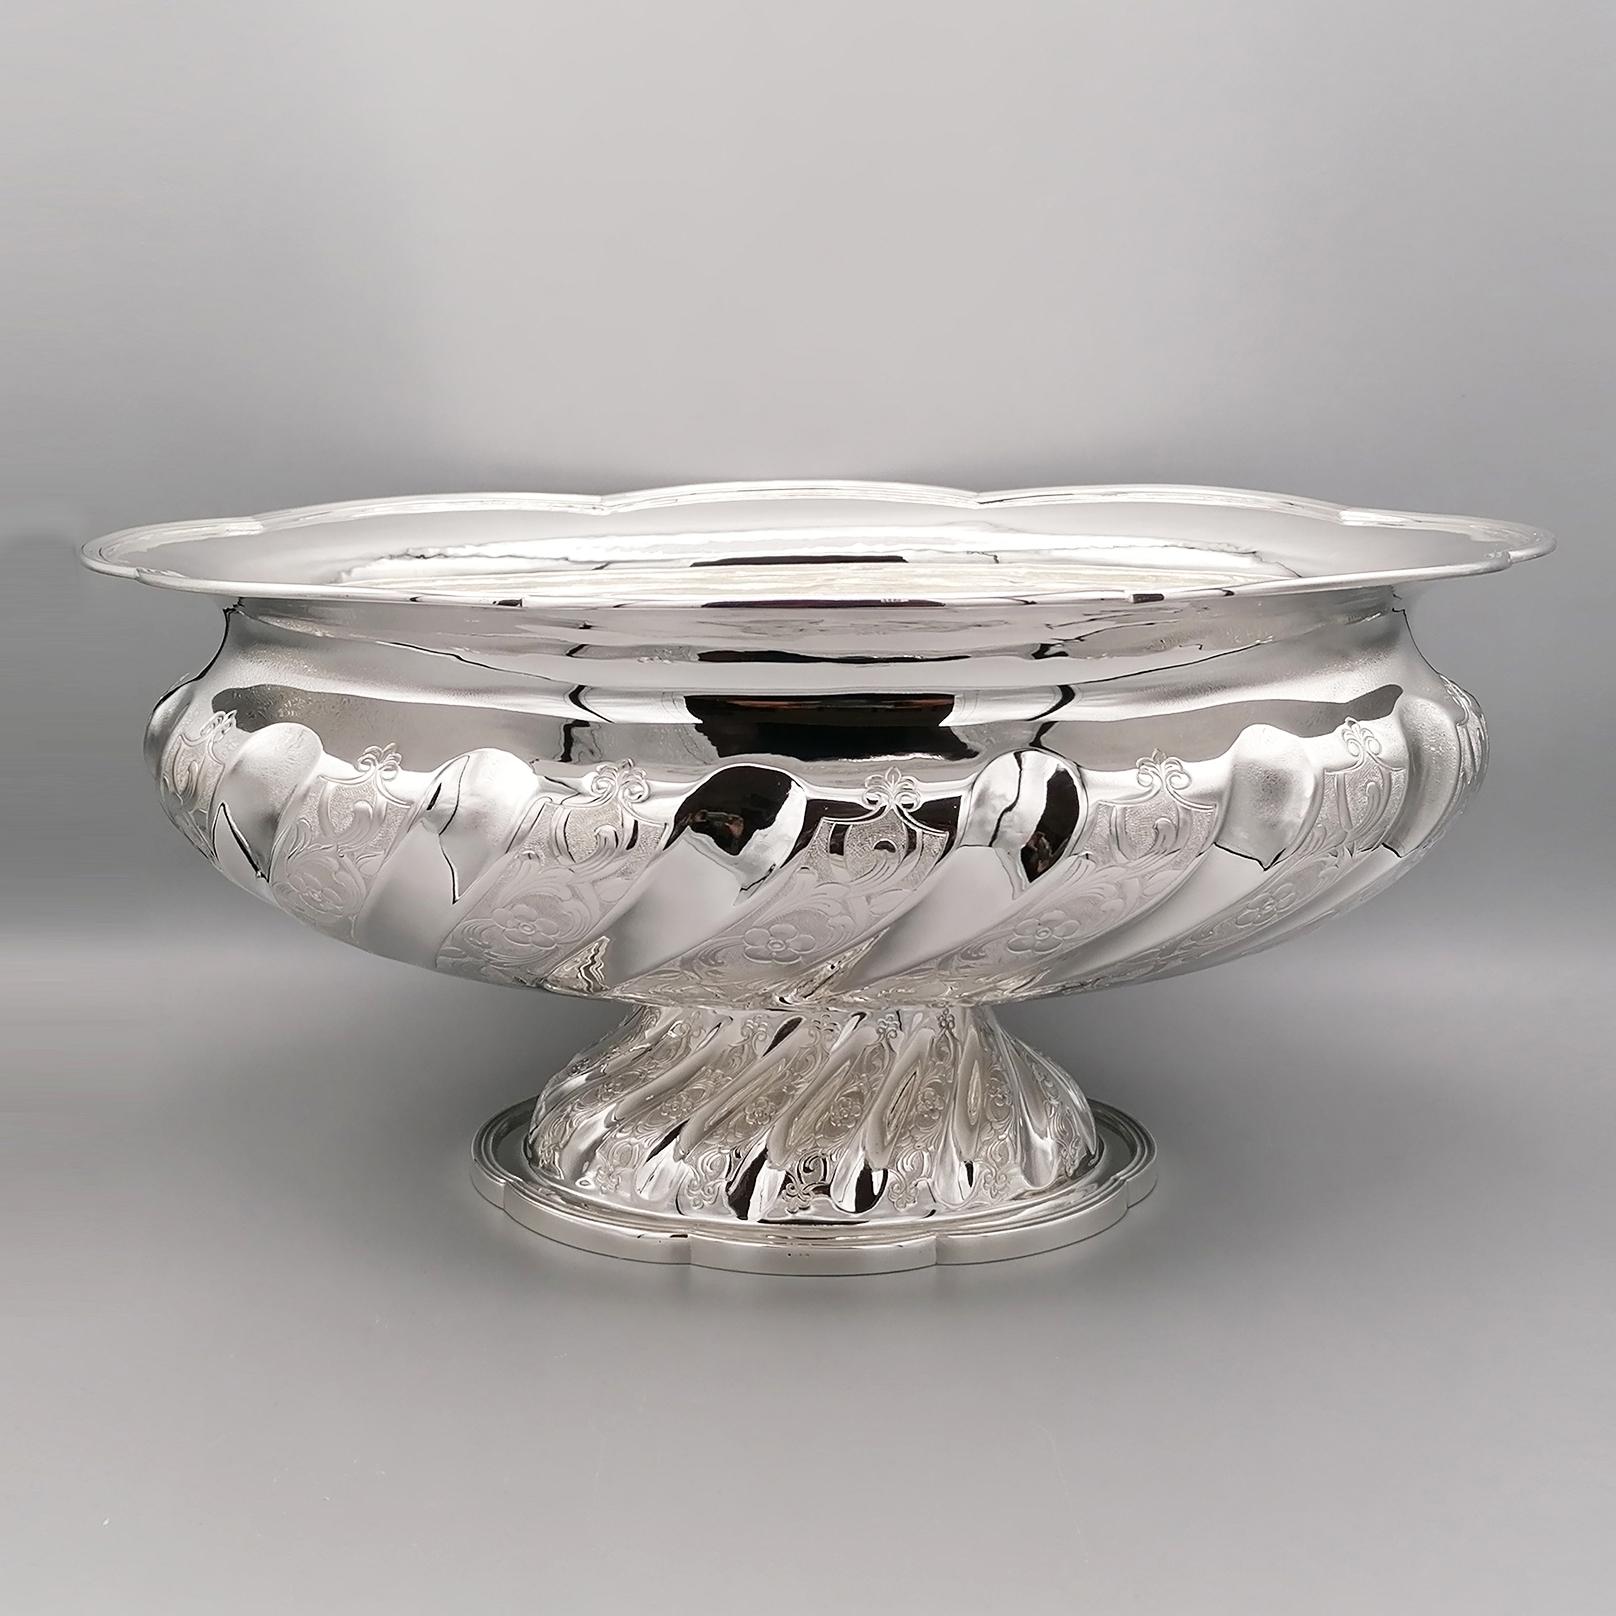 Entirely handmade solid sterling silver centerpiece. 
The shaped and edged oval bowl with a double line rim, rests on a foot which is also oval shaped.
The body of the centerpiece is torchon chiseled.
The torchon is interspersed with a concave shiny